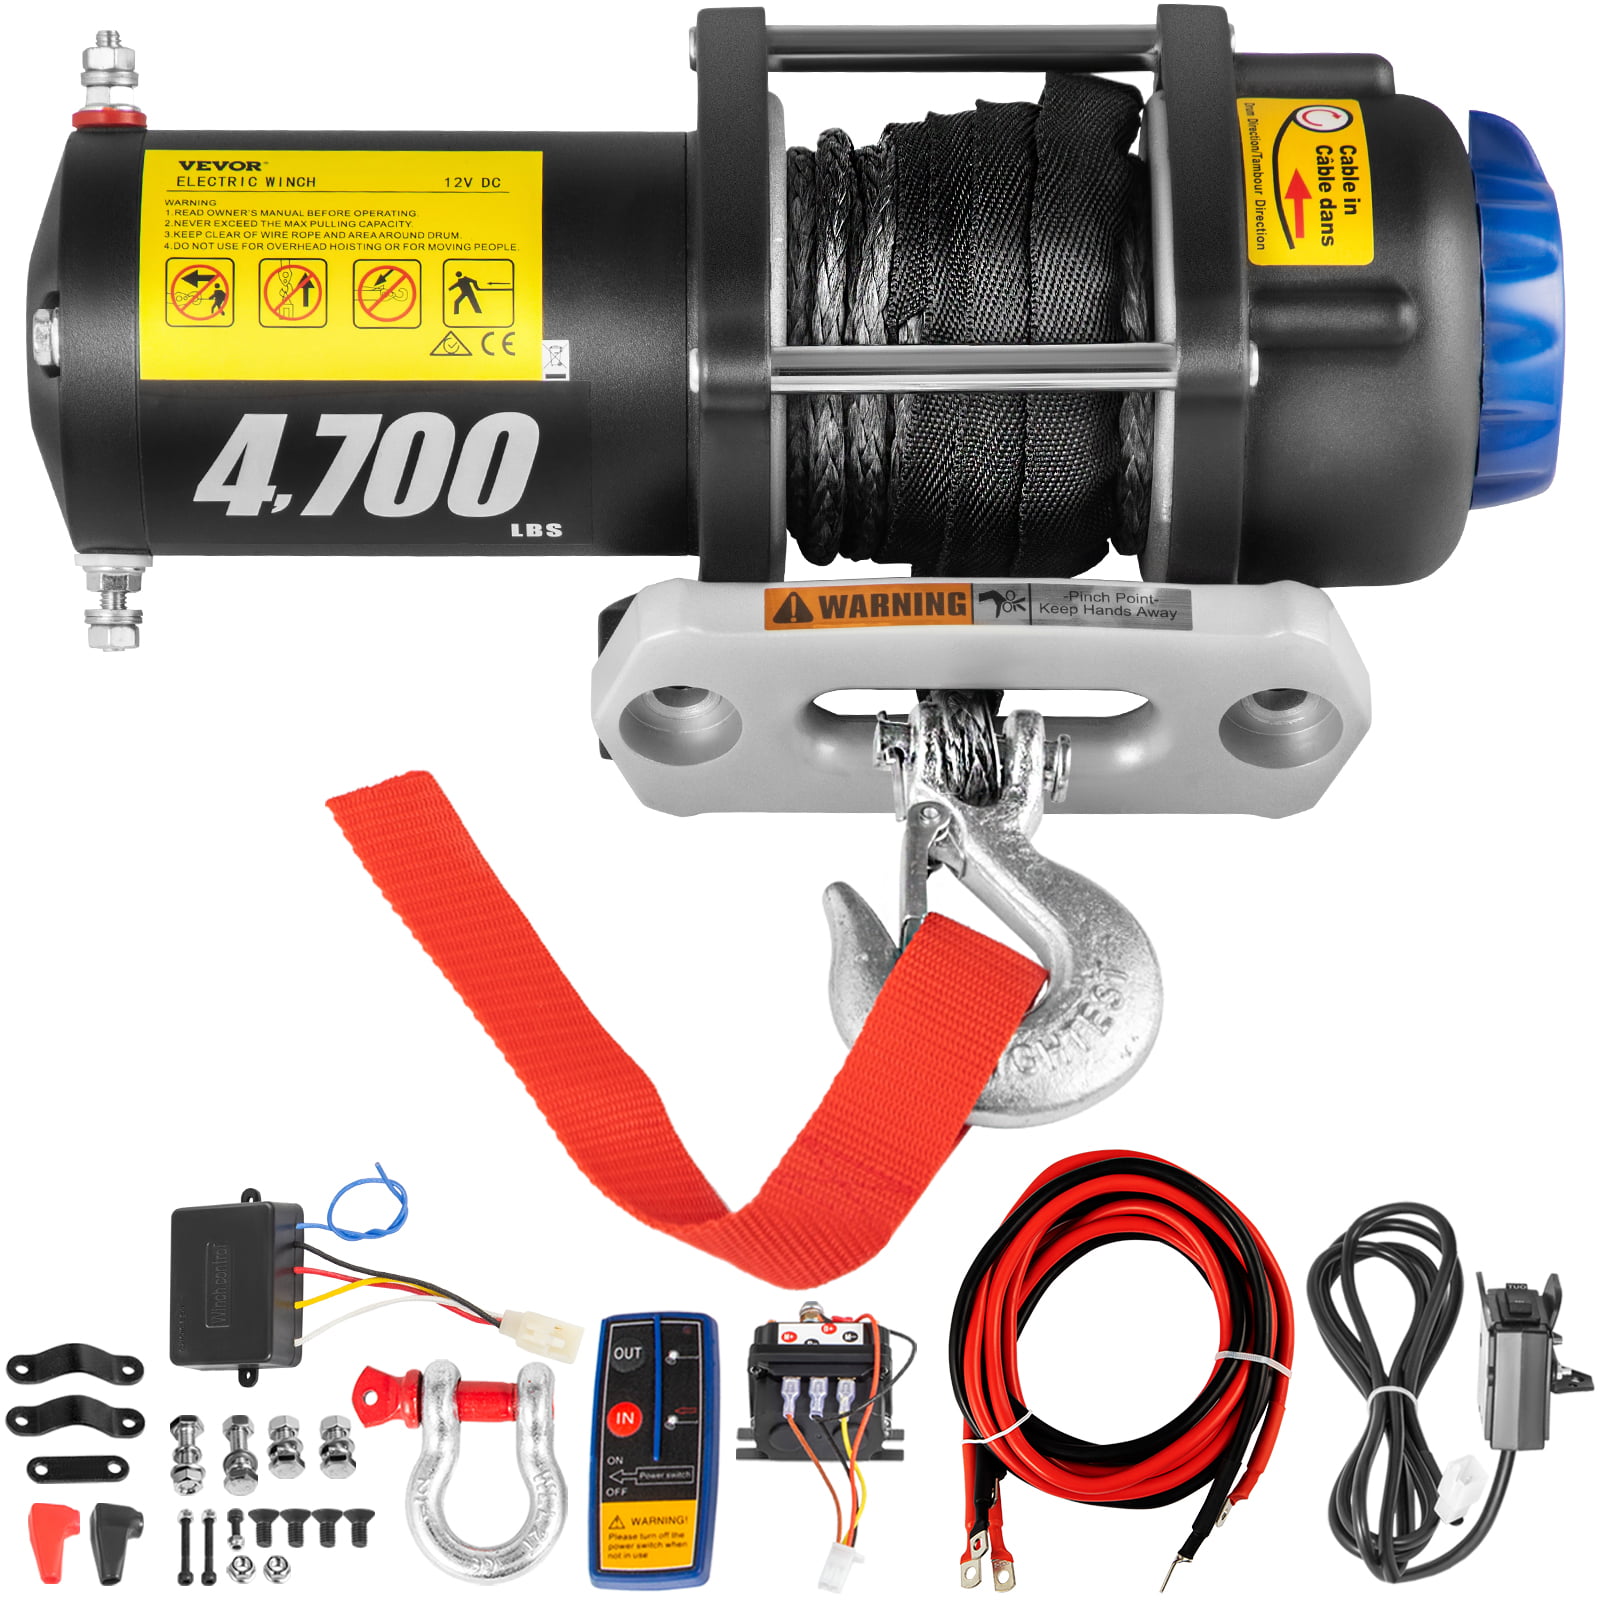 Electric Winch Truck Winch Waterproof IP67 Electric Winch Synthetic Rope Kit with 2 Wireless Handheld Remotes and Wired Handle for 4WD 4x4 Off Road Vehicle Boat Truck XPV AUTO Winch 10000 lb 